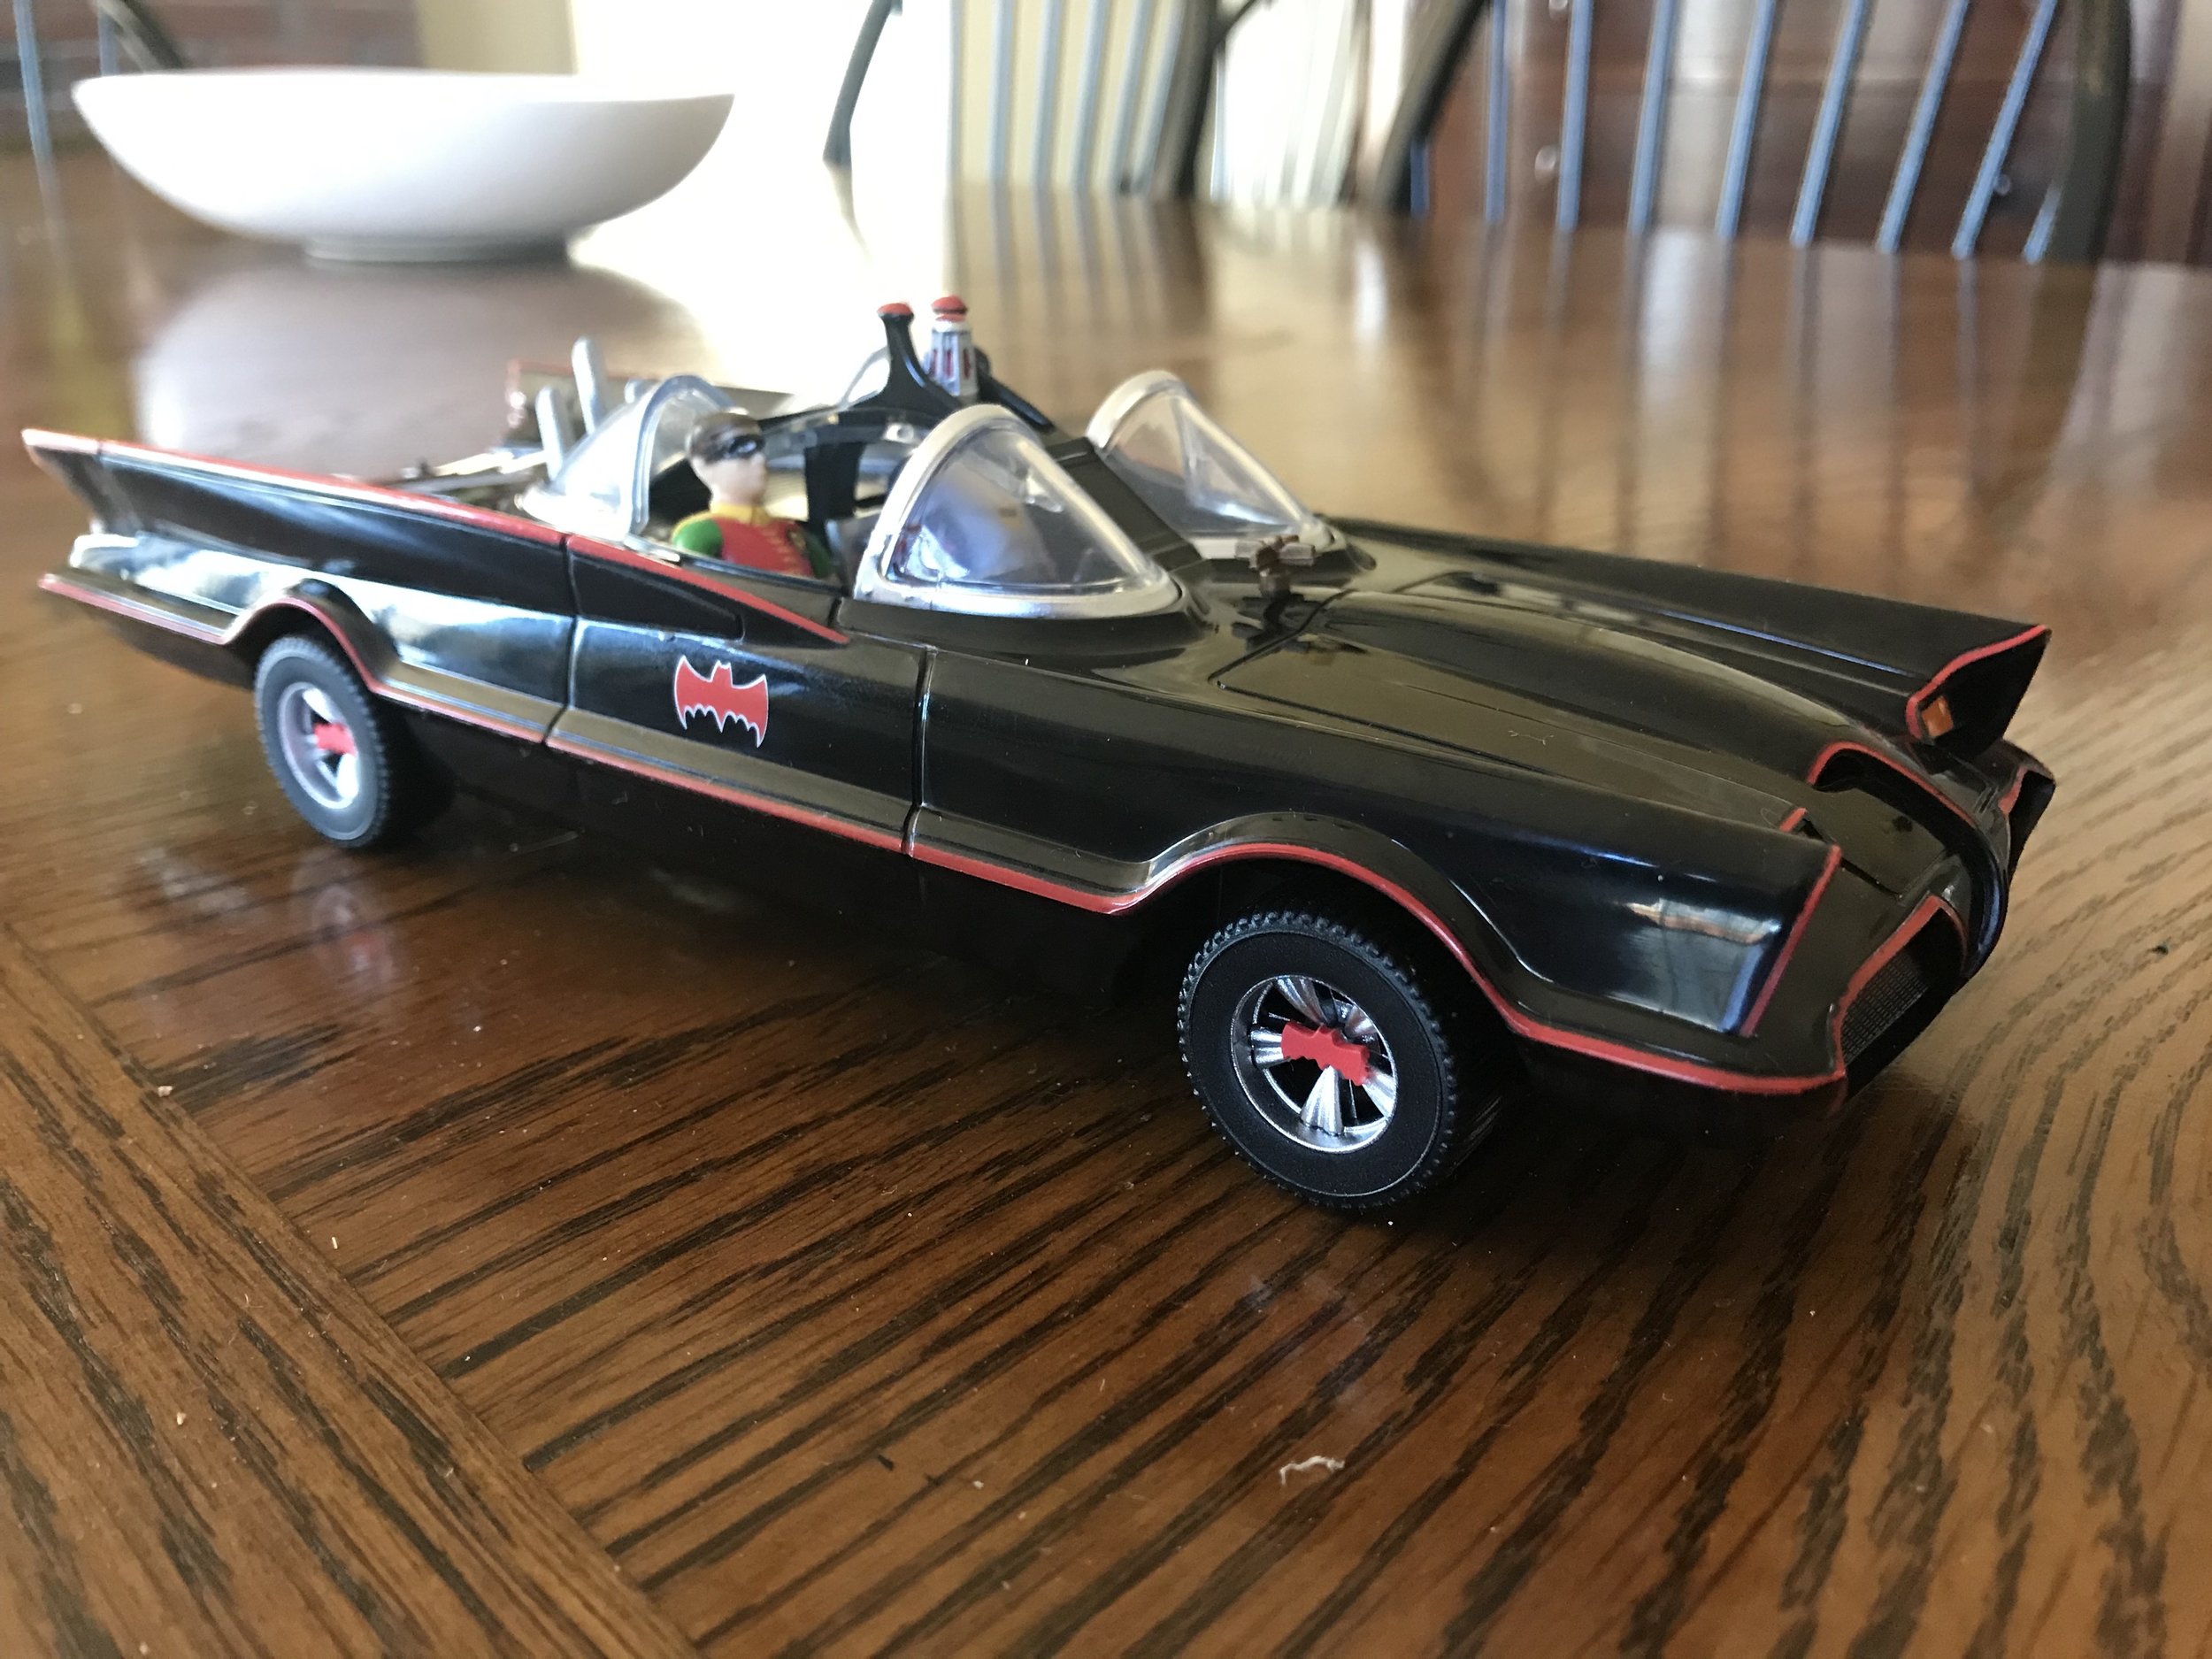  Today (June 13, 2019) I can reveal a secret project I’ve been working on for the past few months: a Batmobile bed I made for Steve Morrison of The Preston and Steve Show on 93.3 WMMR as a surprise for his birthday. Steve is fairly obsessed with supe